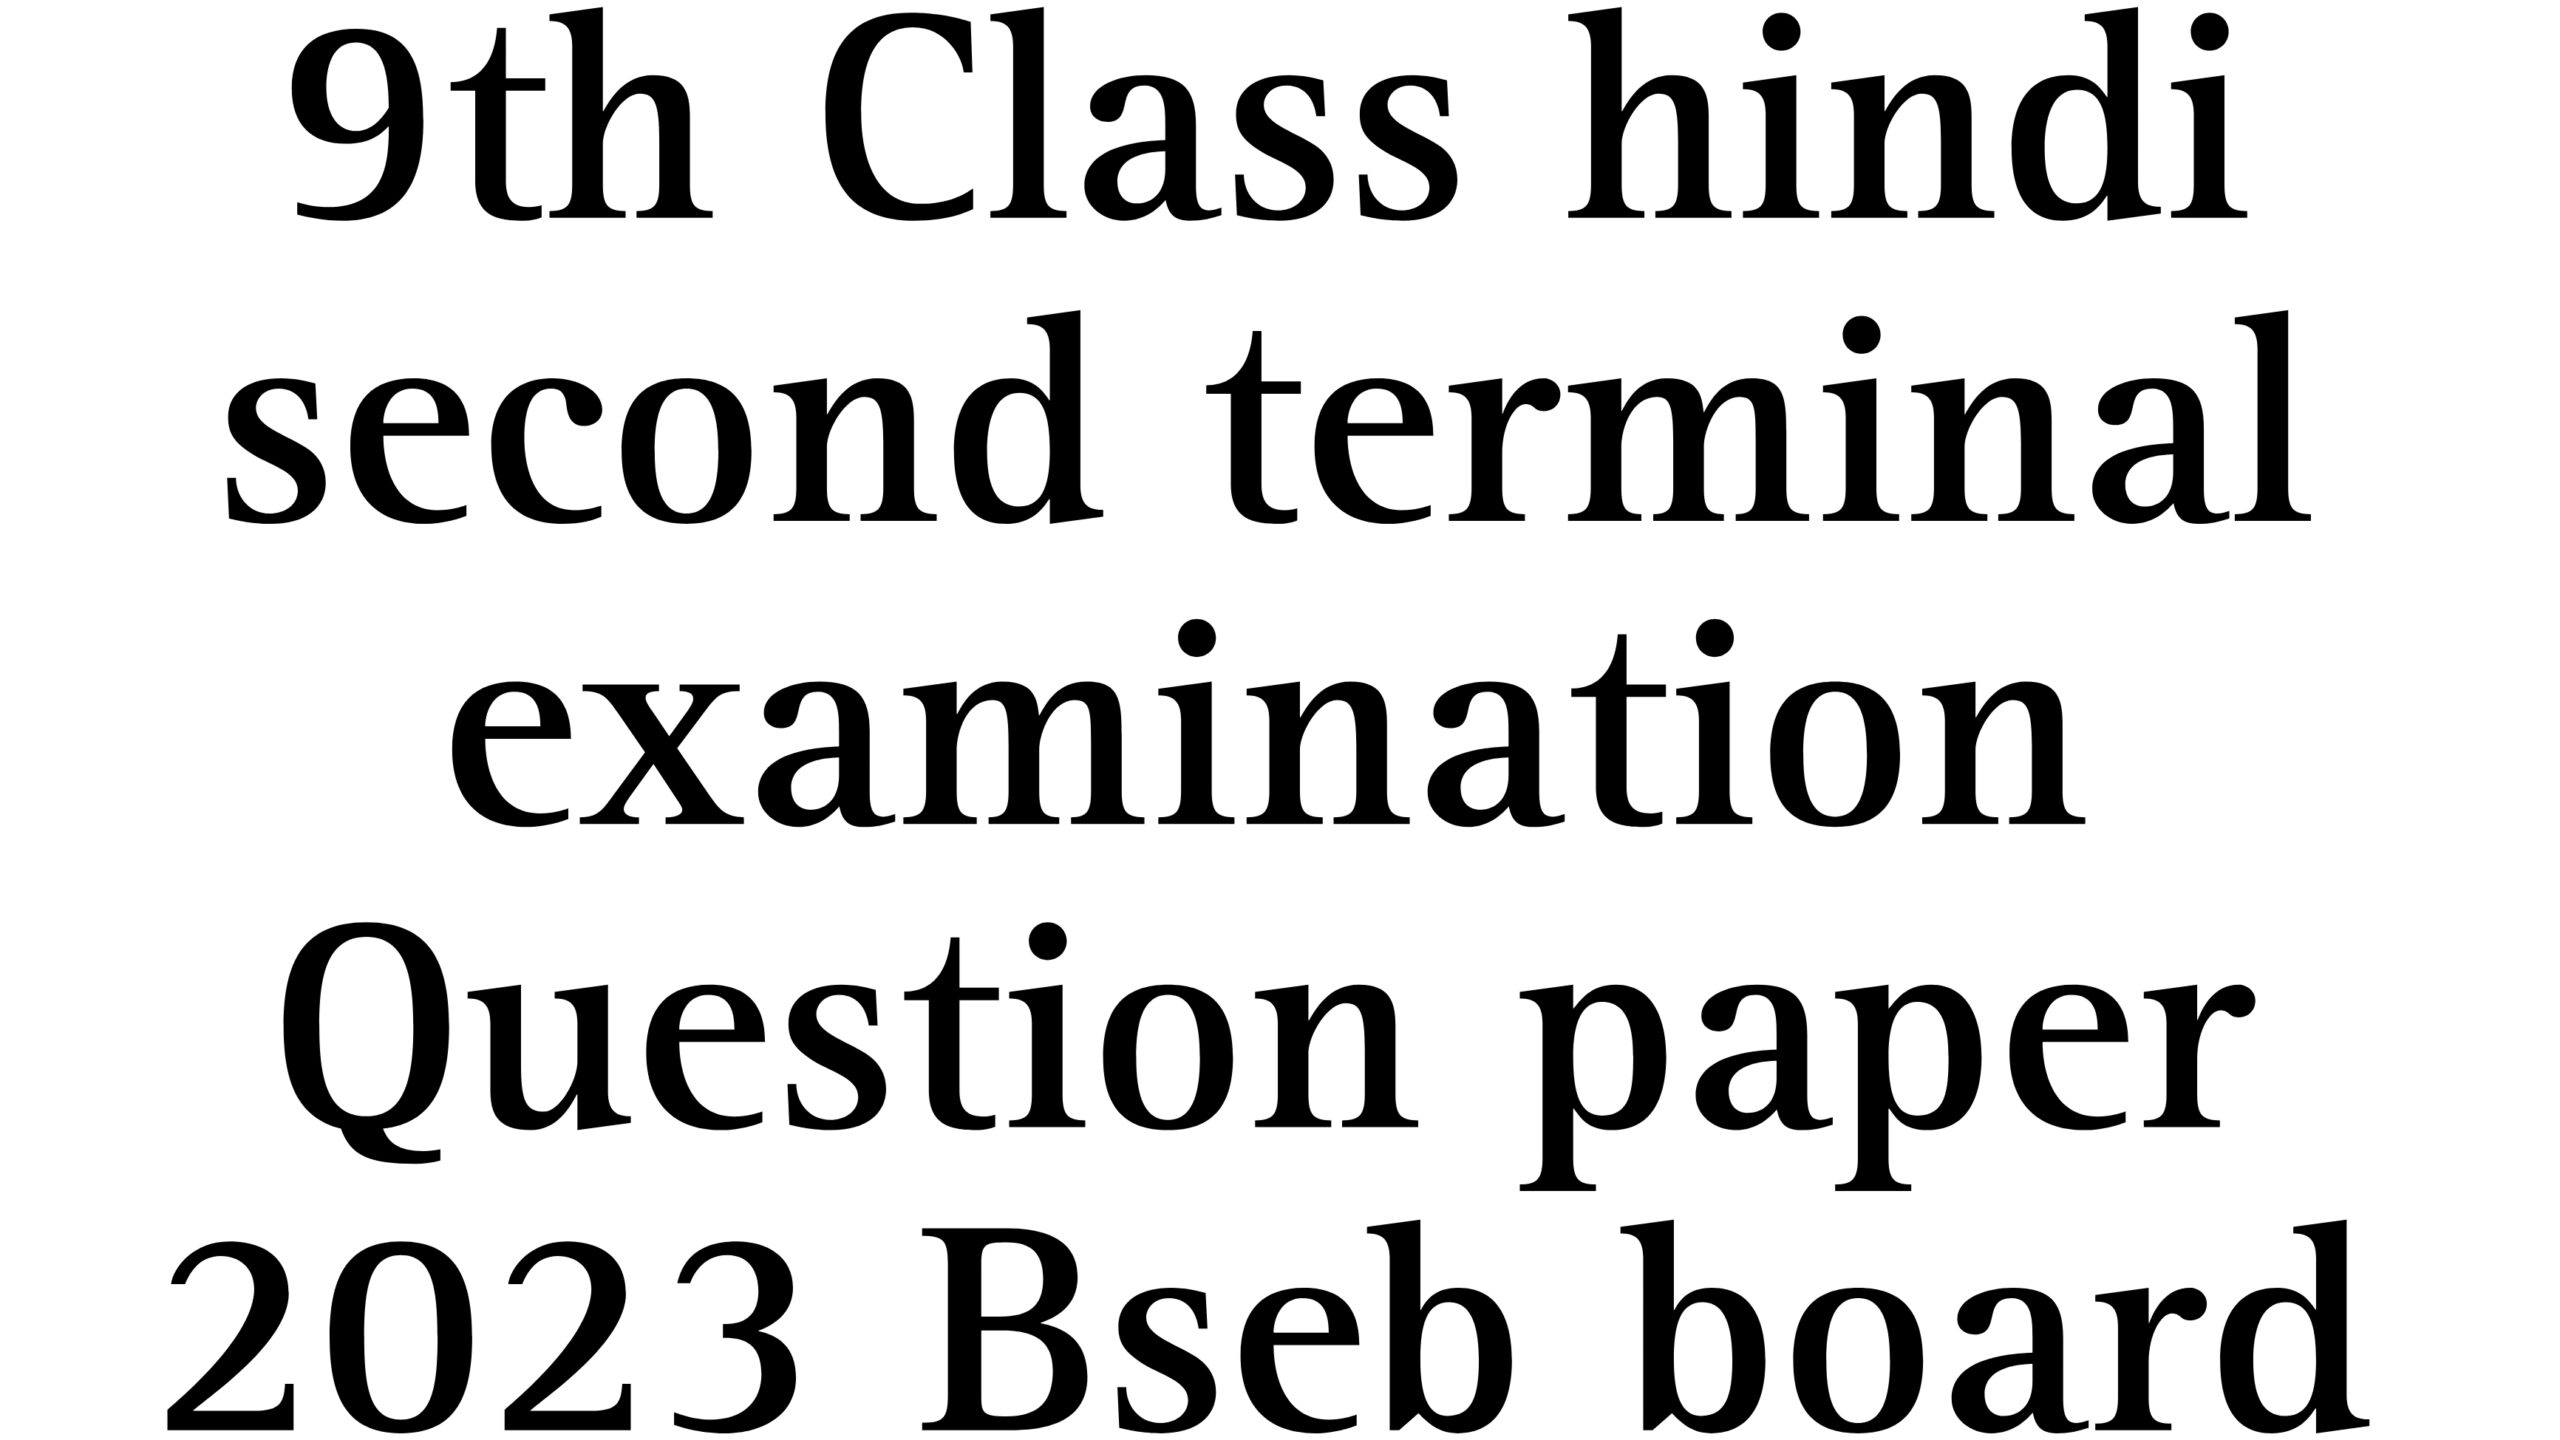 Bseb board 2nd terminal examination Question paper 2023 PDF